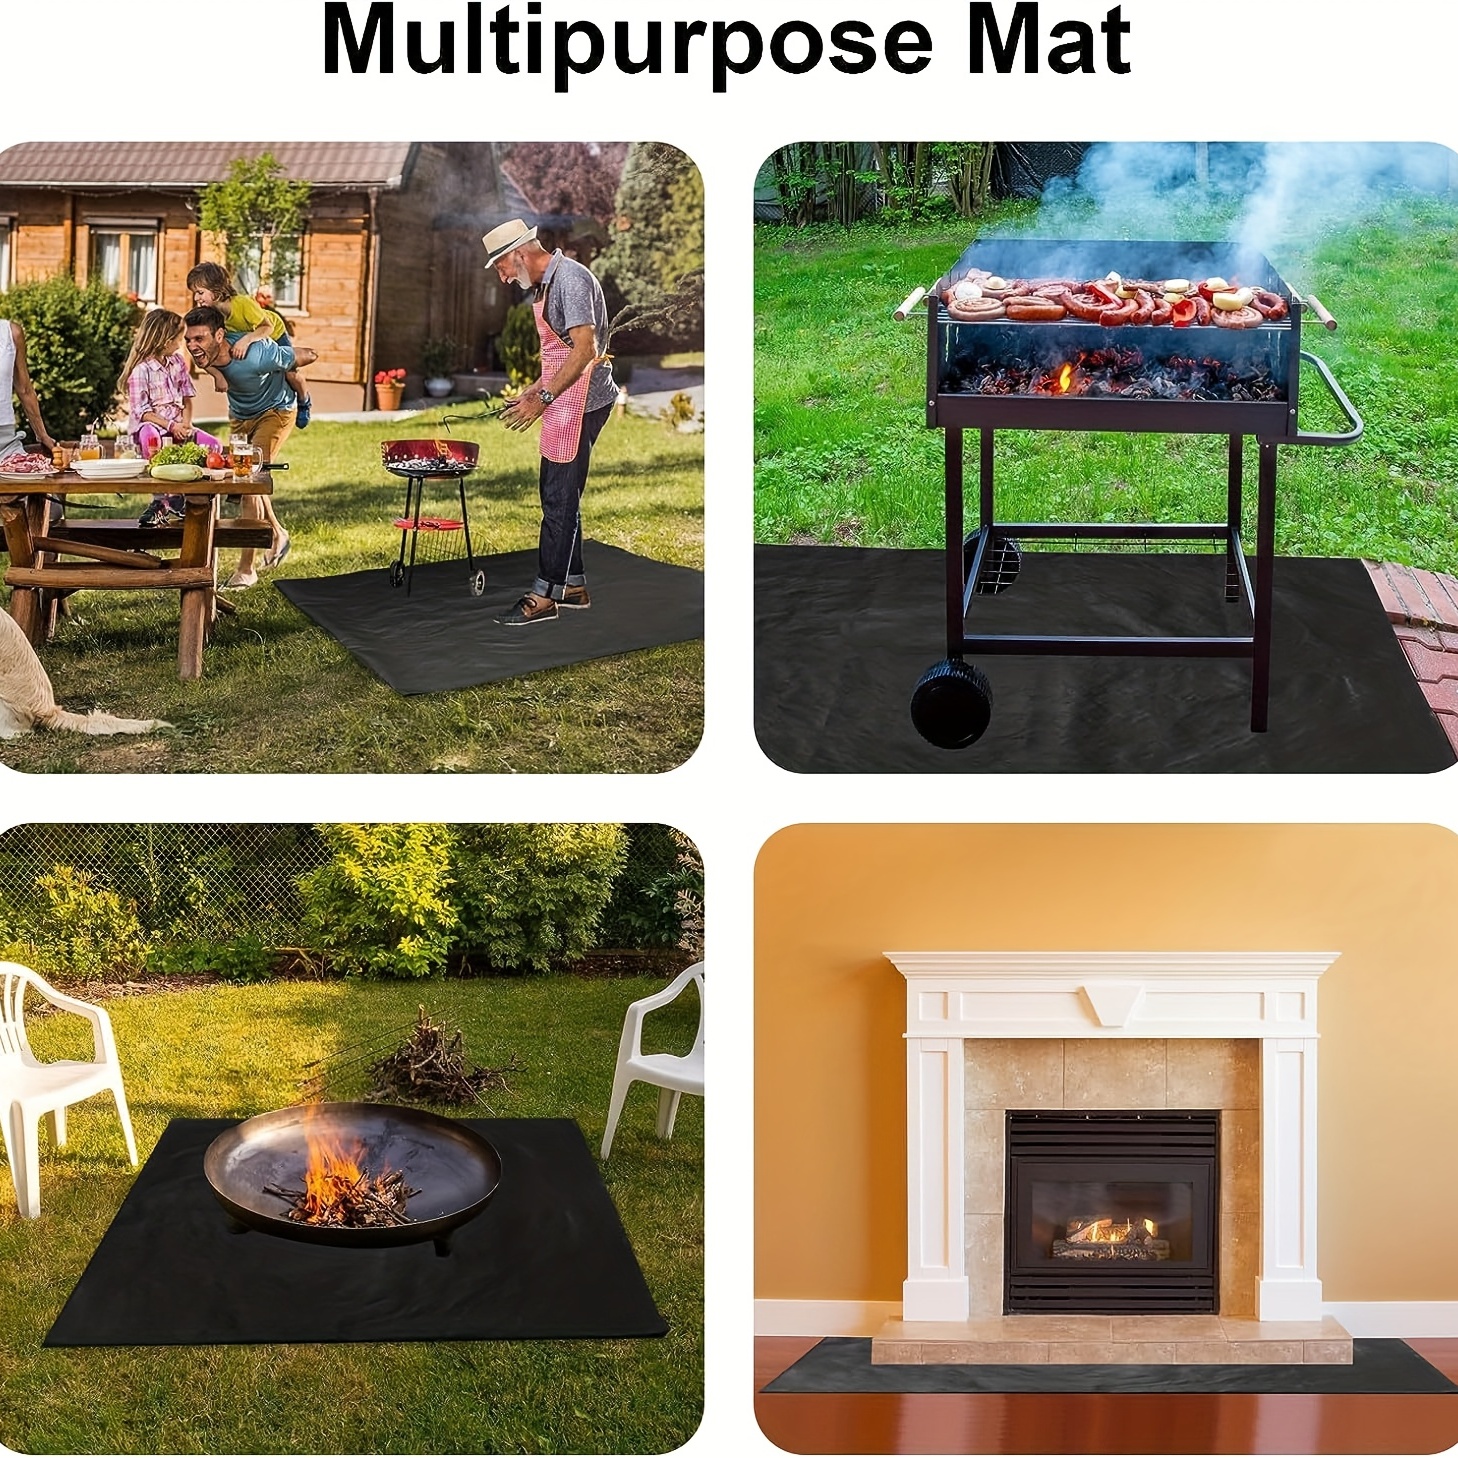 plplaaoo Grill Mat, BBQ Floor Mat, Outdoor Flame Retardant Barbecue Mat,  BBQ Oil Pad for Camping Hiking Works on Gas, Charcoal, Pellet Grill, Heavy